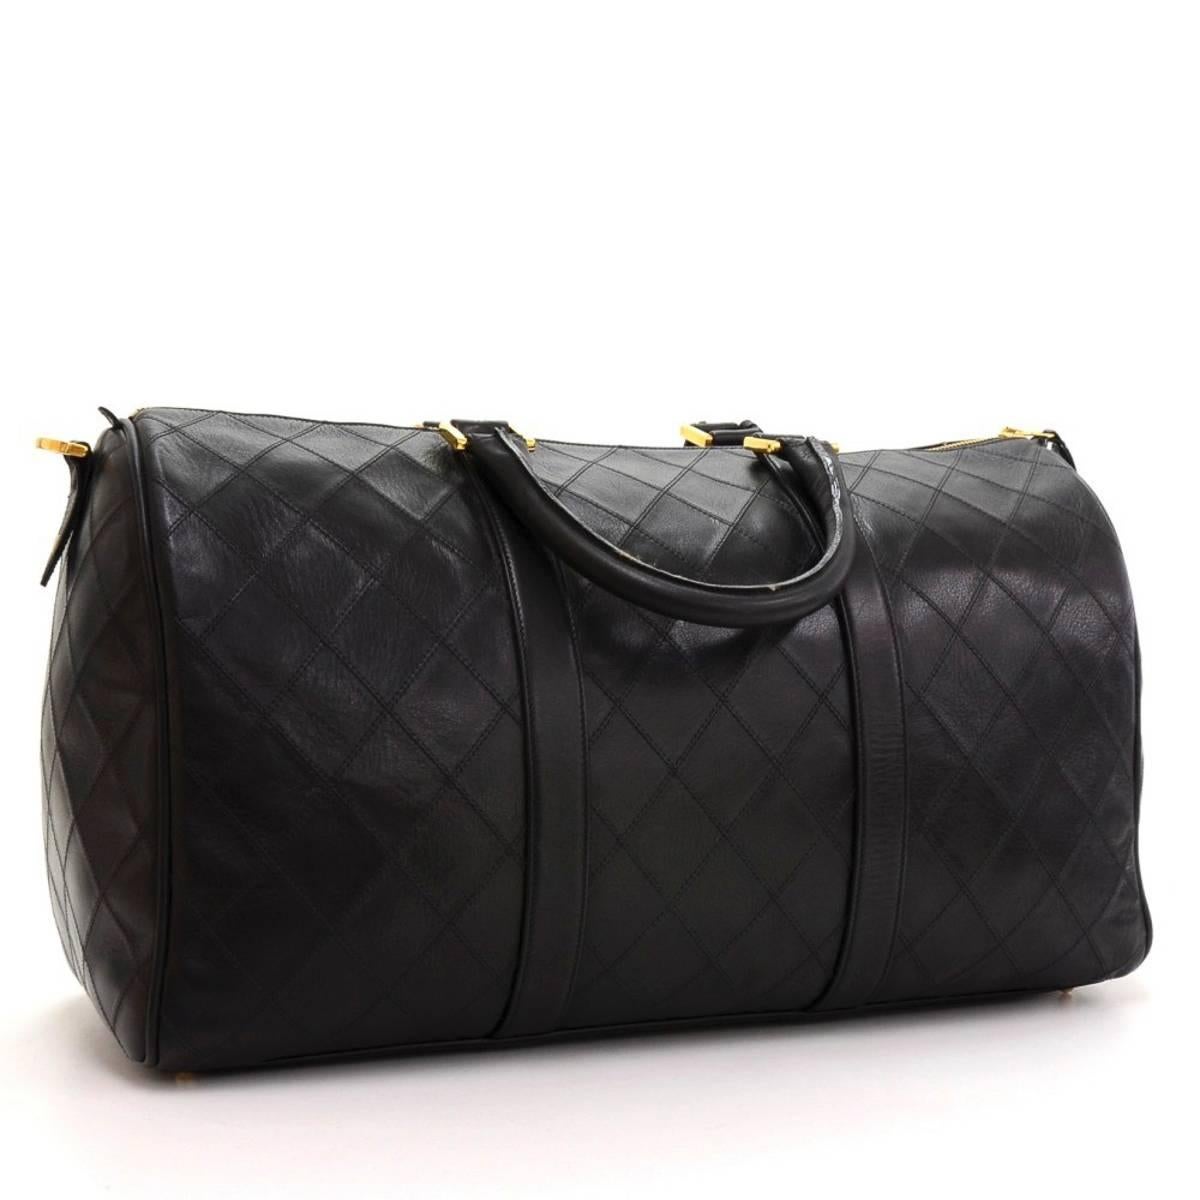 Women's 2000's Chanel Black Quilted Lambskin Vintage Boston Travel Bag